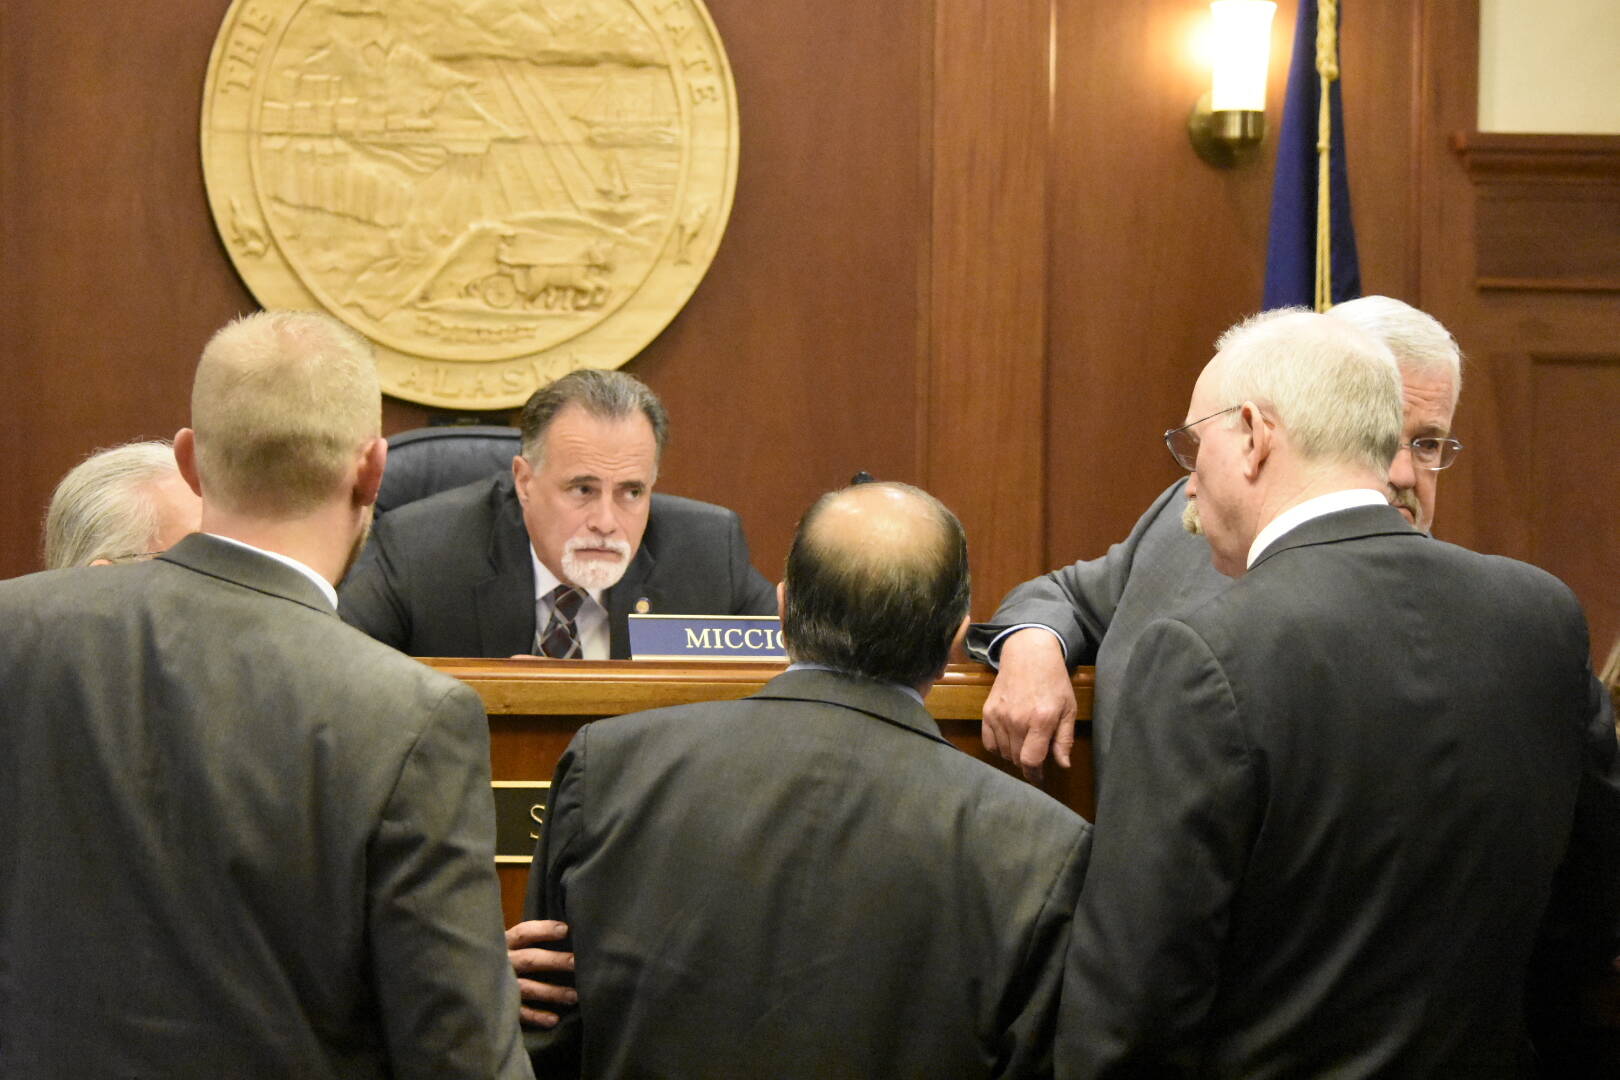 Senate President Peter Micciche, R-Soldotna, seen here in this June 16, 2021, file photo, announced Wednesday he will not seek relelection in the Alaska State Senate, where he has served since 2013. (Peter Segall / Juneau Empire file)